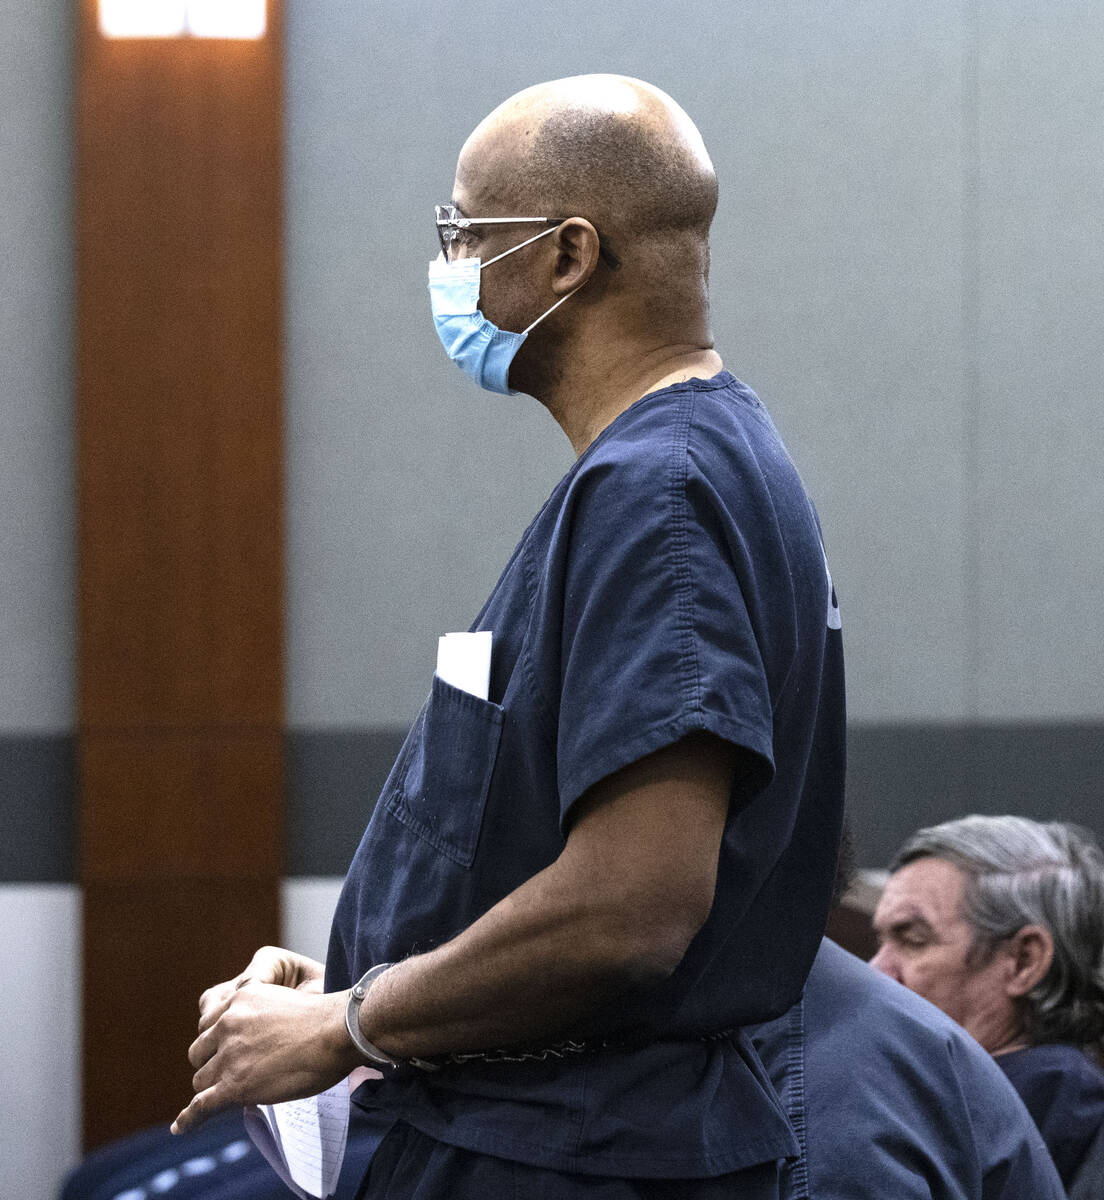 Wendell Melton, who was found guilty of killing his 14-year-old son in 2017, appears in court d ...